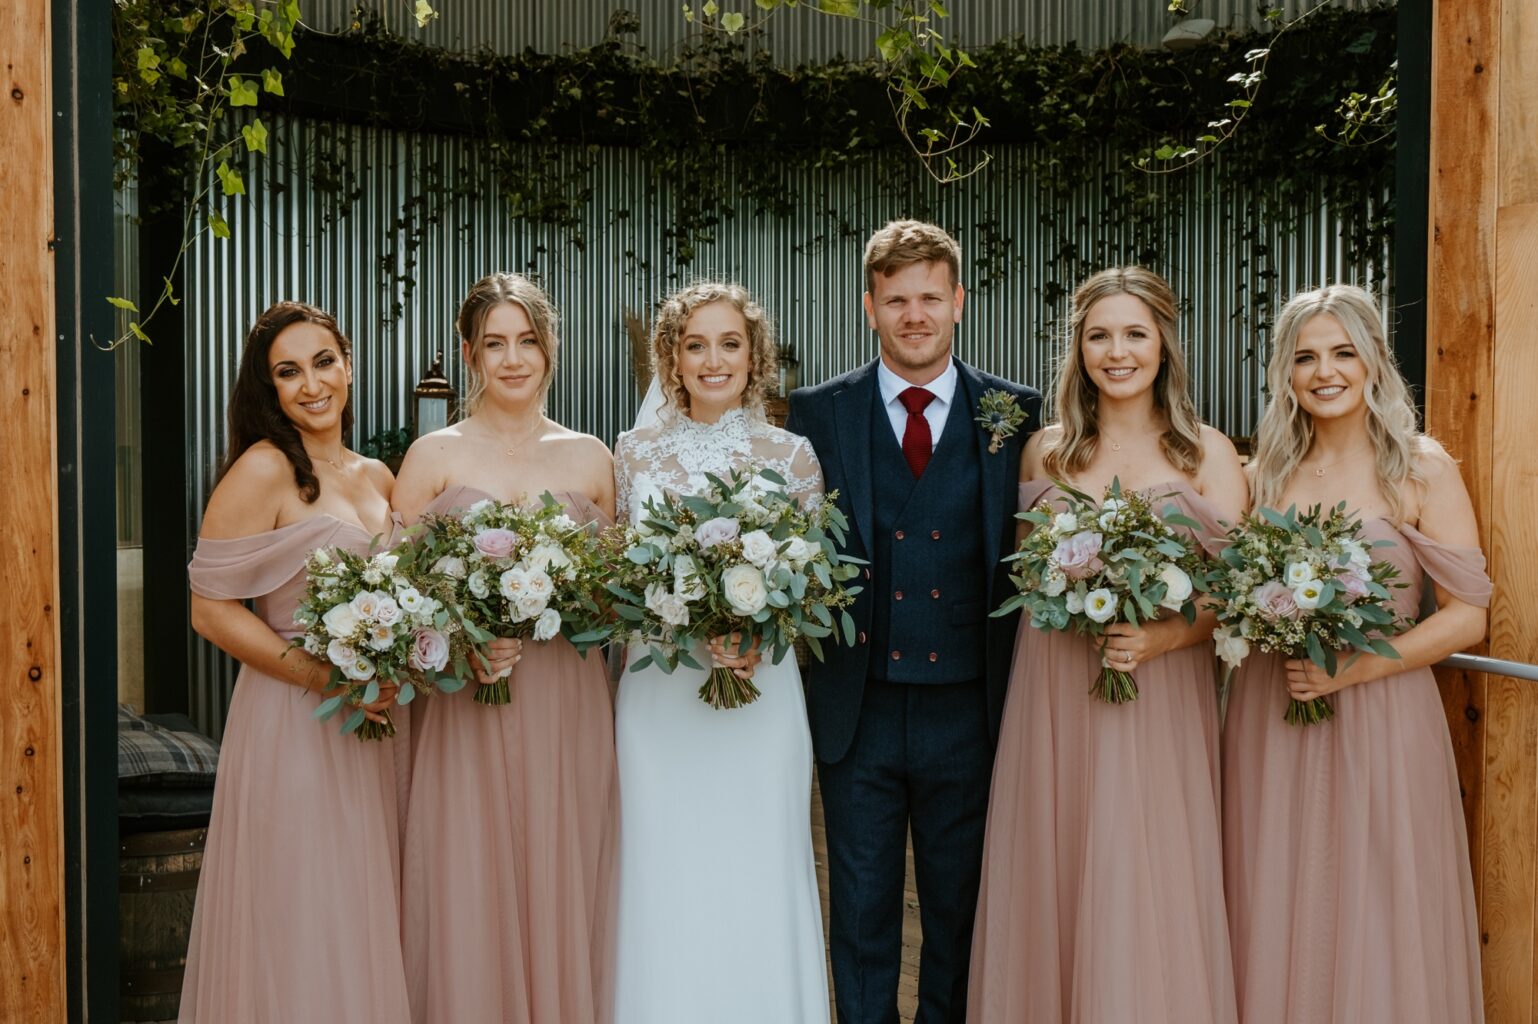 bride and groom in group picture with four bridesmaids bride and bridesmaids all holding bouquets cairns farm estate wedding